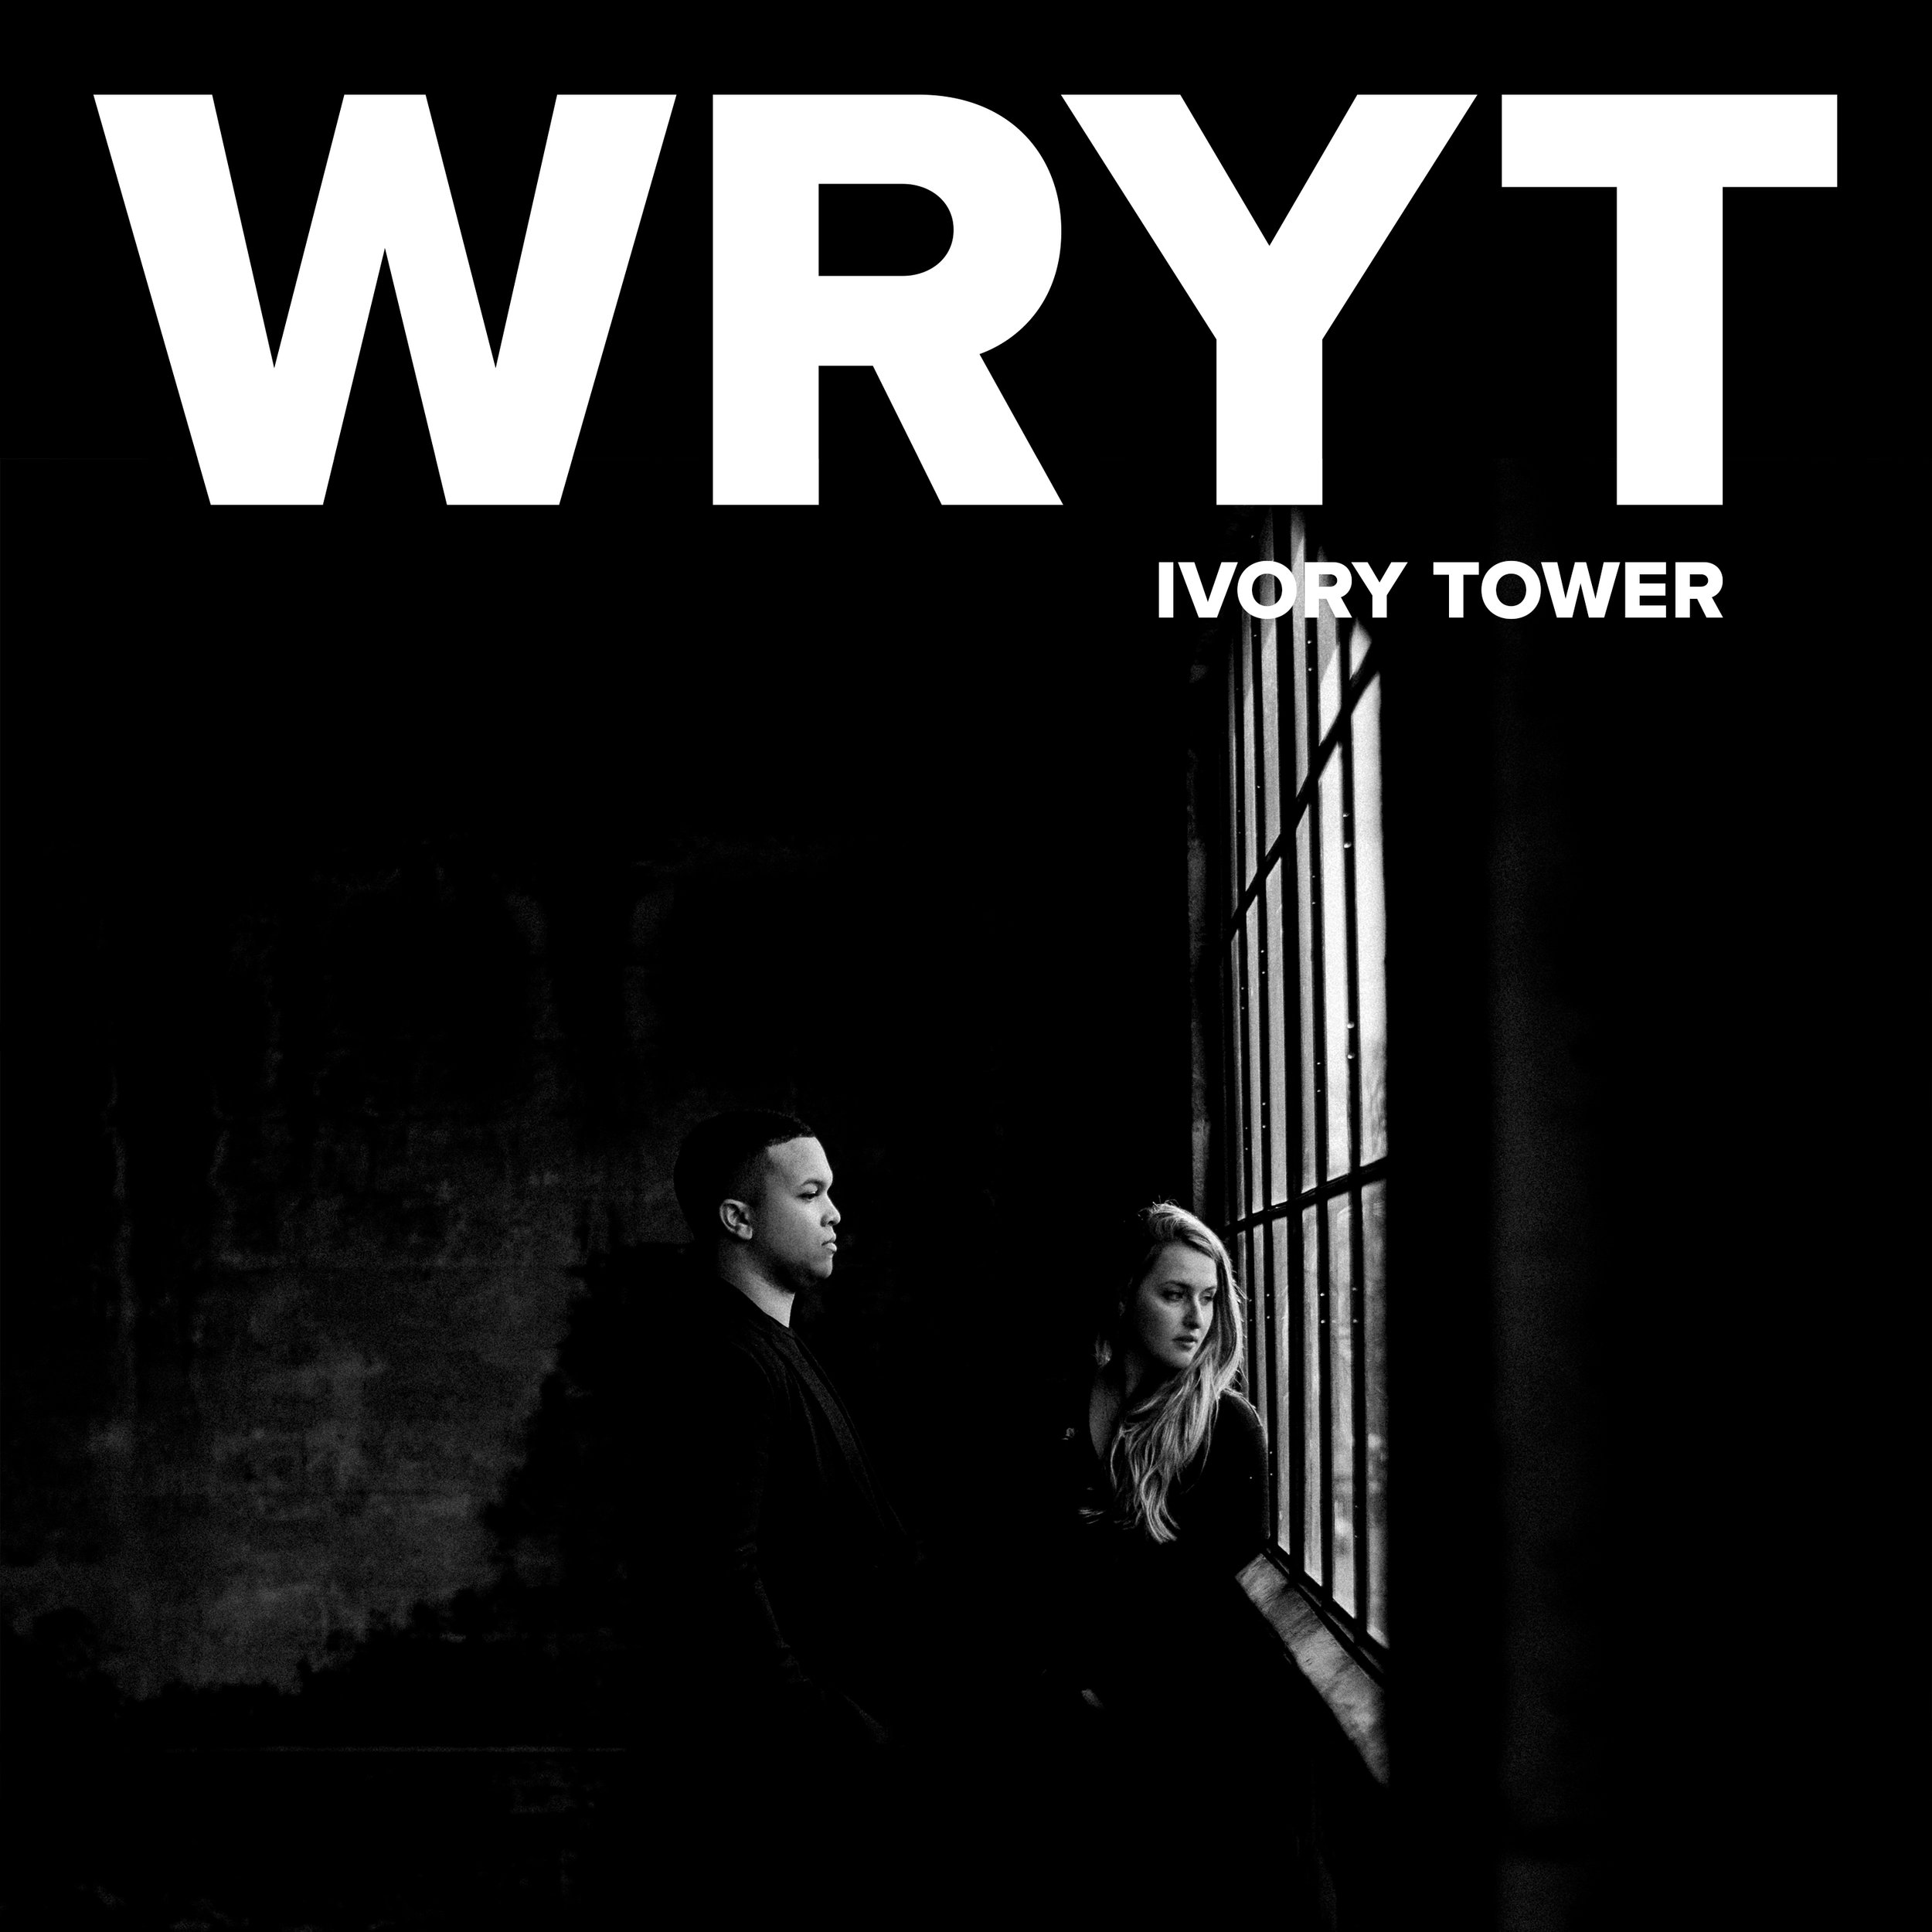 WRYT - Ivory Tower